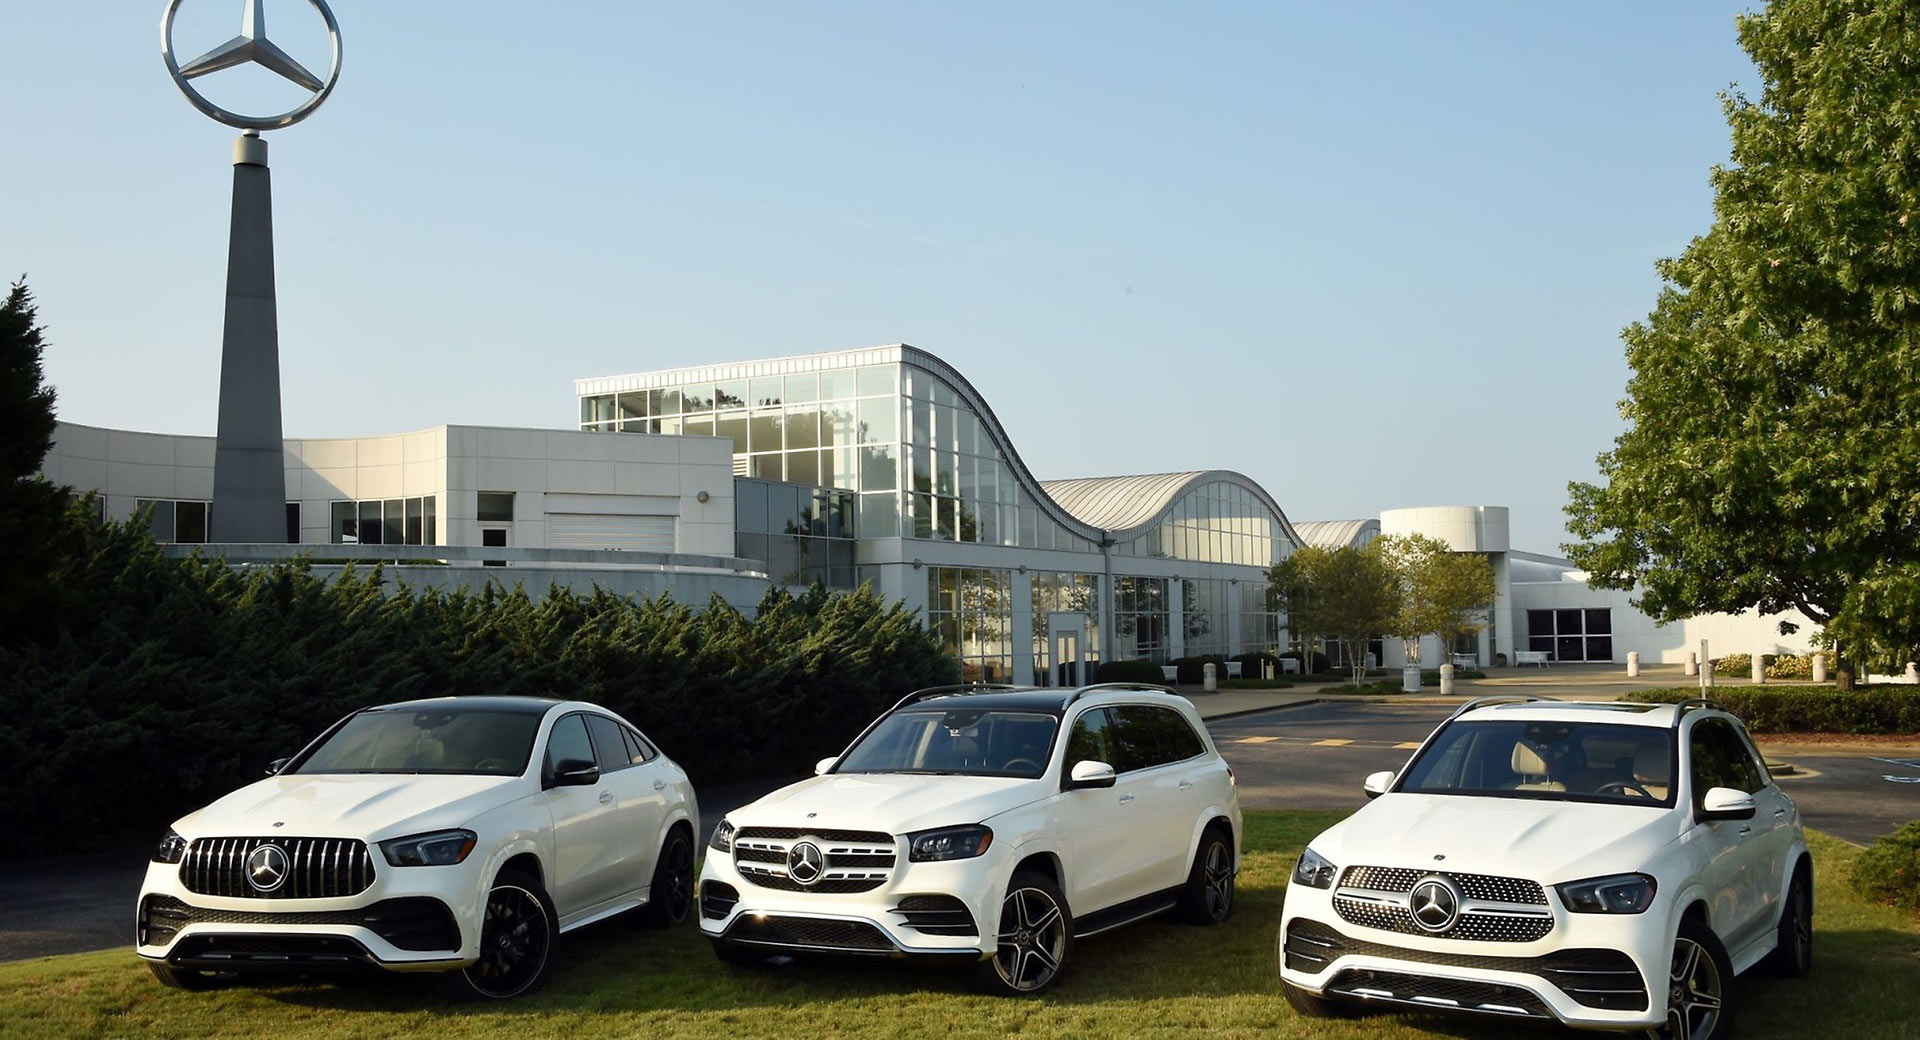 Daimler To Idle Mercedes Plant In Alabama Over Parts Shortage From Mexico